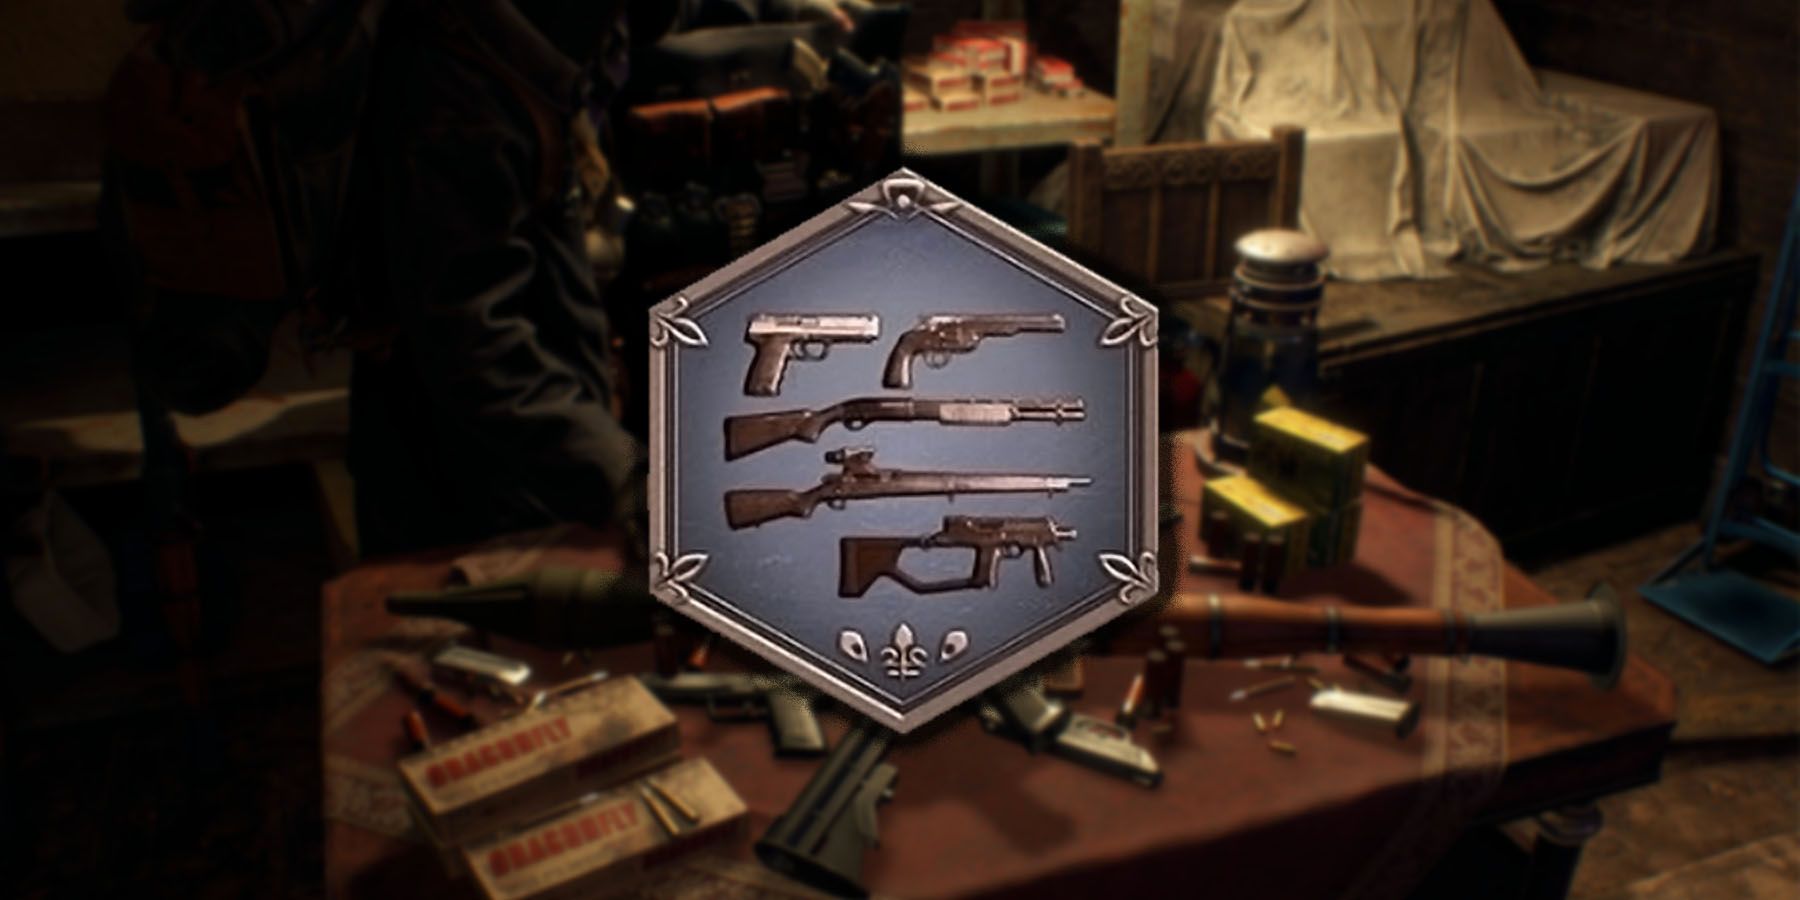 resident-evil-4-how-to-get-all-weapons-gun-fanatic-trophy-achievement